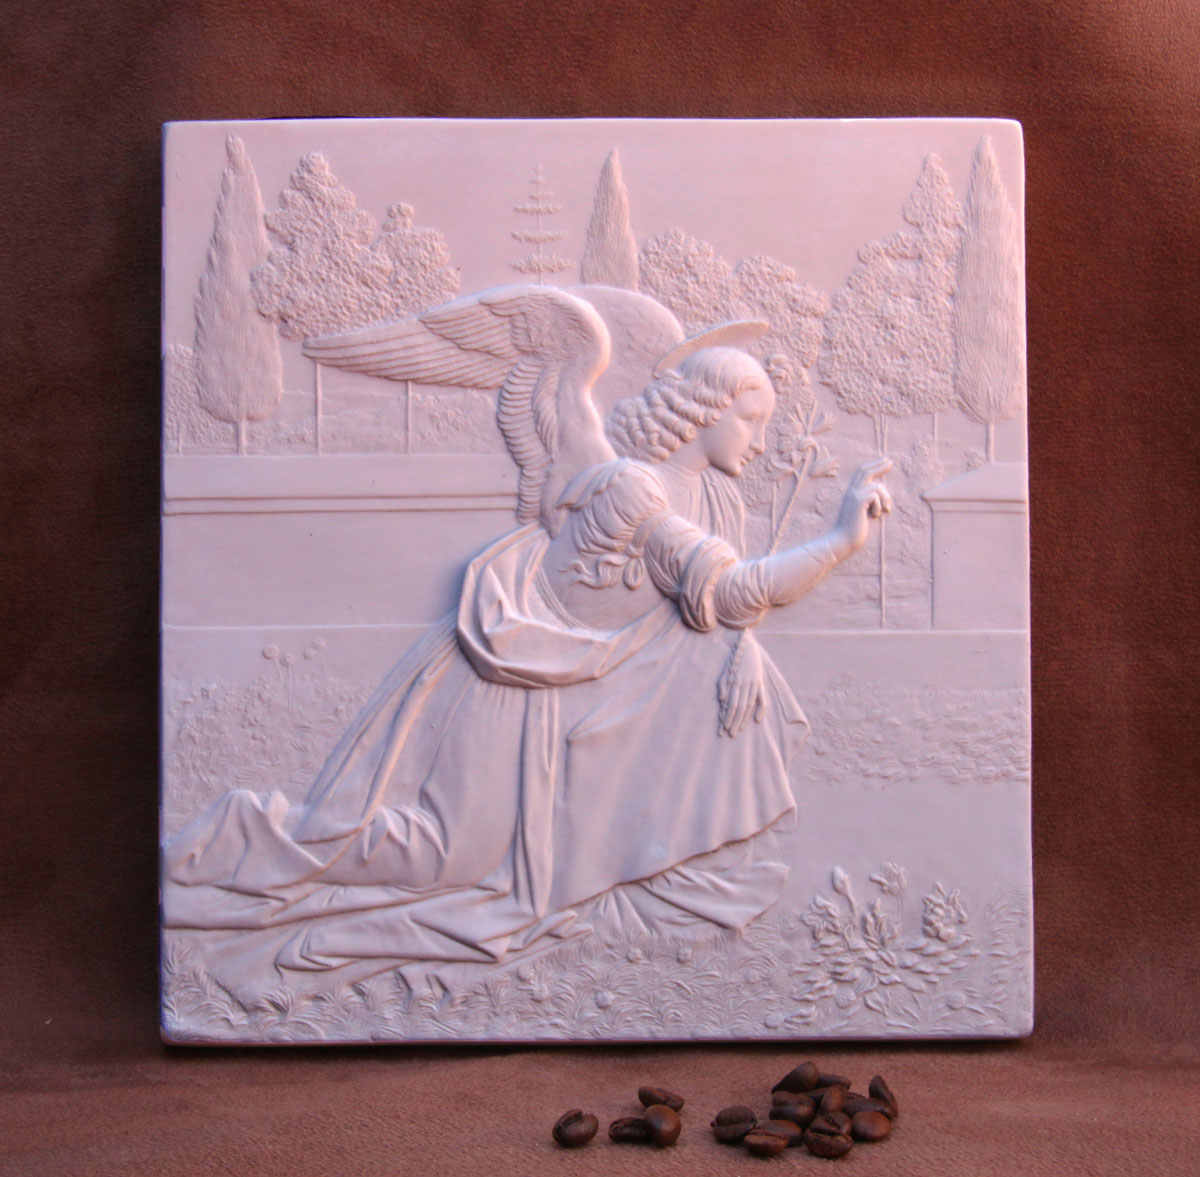 Purchase Angel of Annunciation (White), made in British Plaster by The Modern Souvenir Company in Bath, UK.